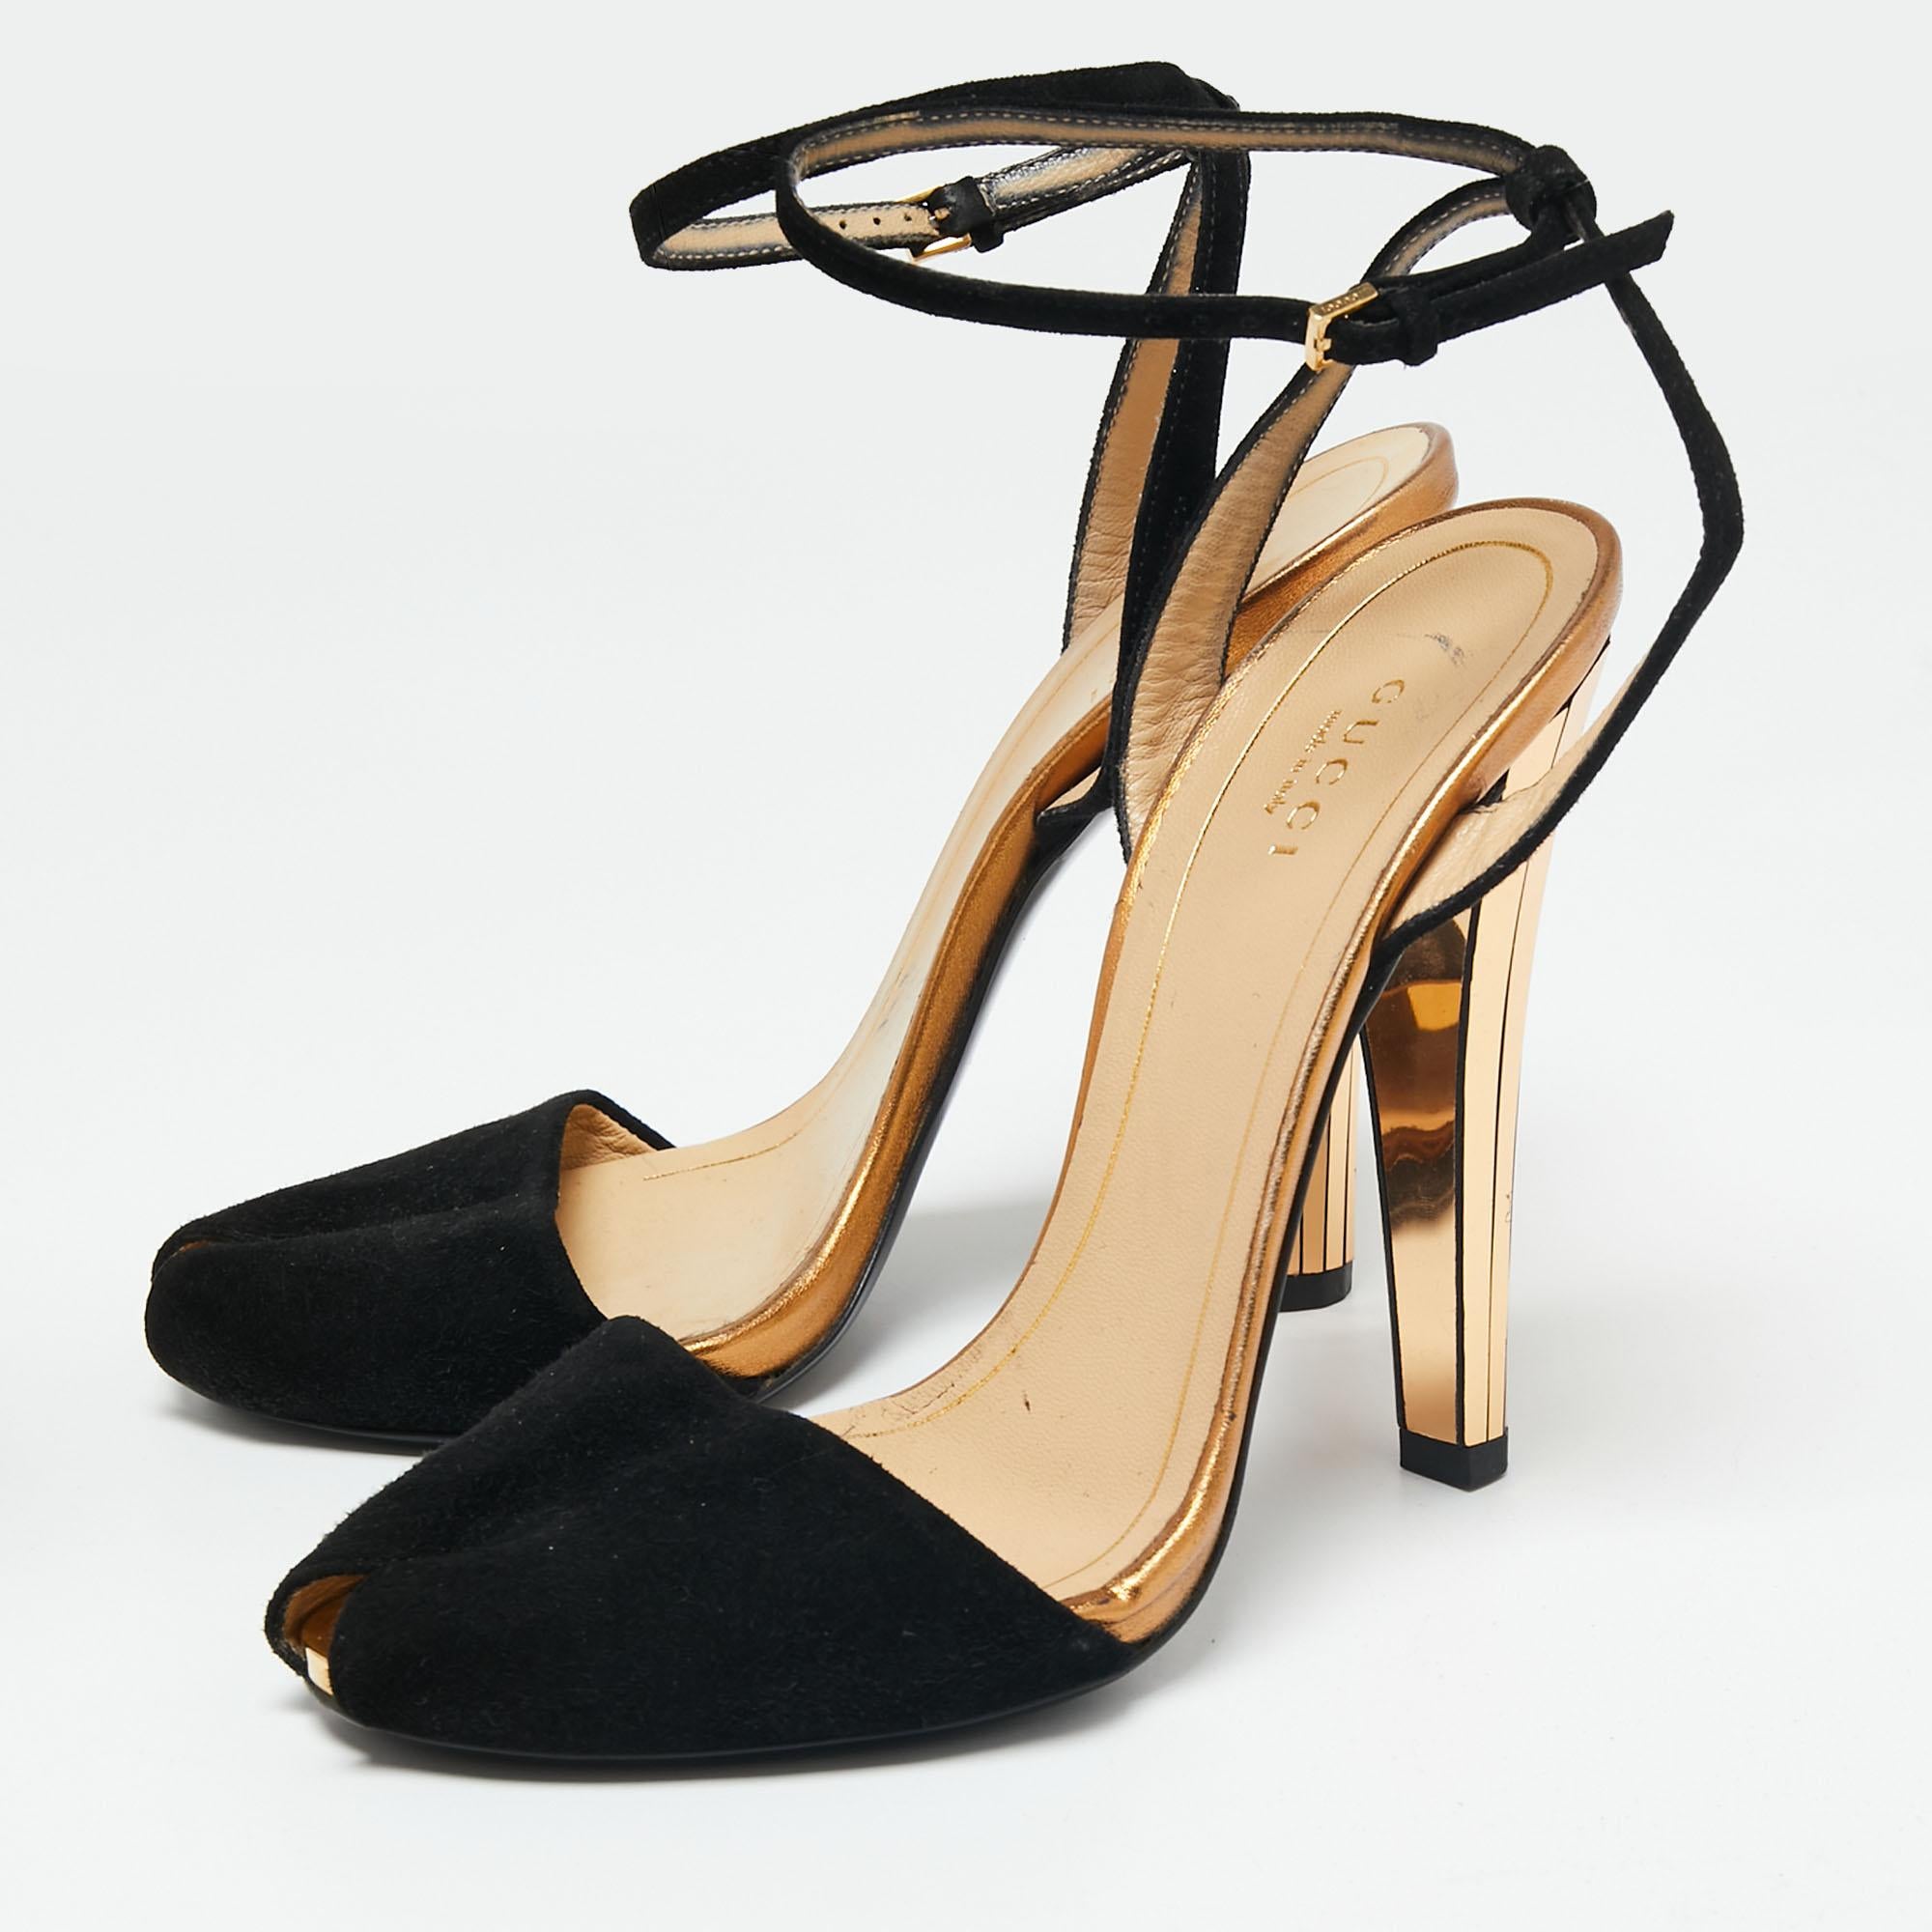 Walk stylishly as you flaunt these sandals from the House of Gucci. Designed using black-gold suede, these sandals are accentuated with 12 cm heels, an ankle strap, and open-toes. They feature gold-toned hardware. Match them with your outfits for a